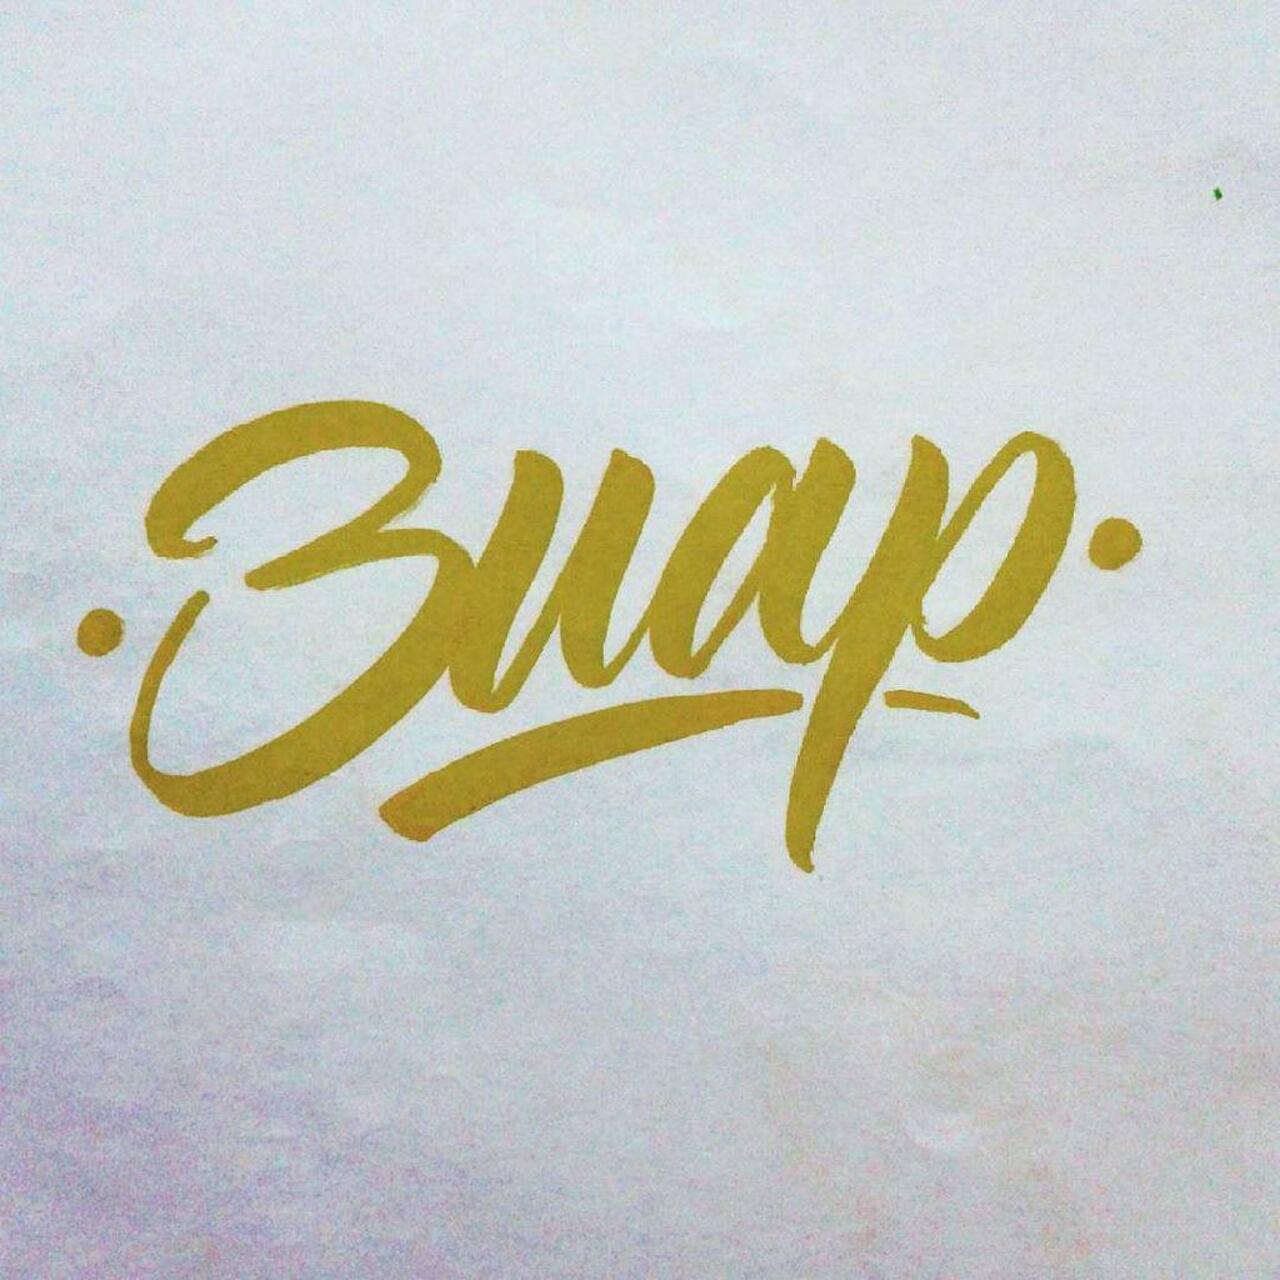 By senz_one "Buap" #thefinelab #ligaturecollective #graffiti #streetart #letter #lettering #letters #hand #handlett… http://t.co/20H1tf5QEN